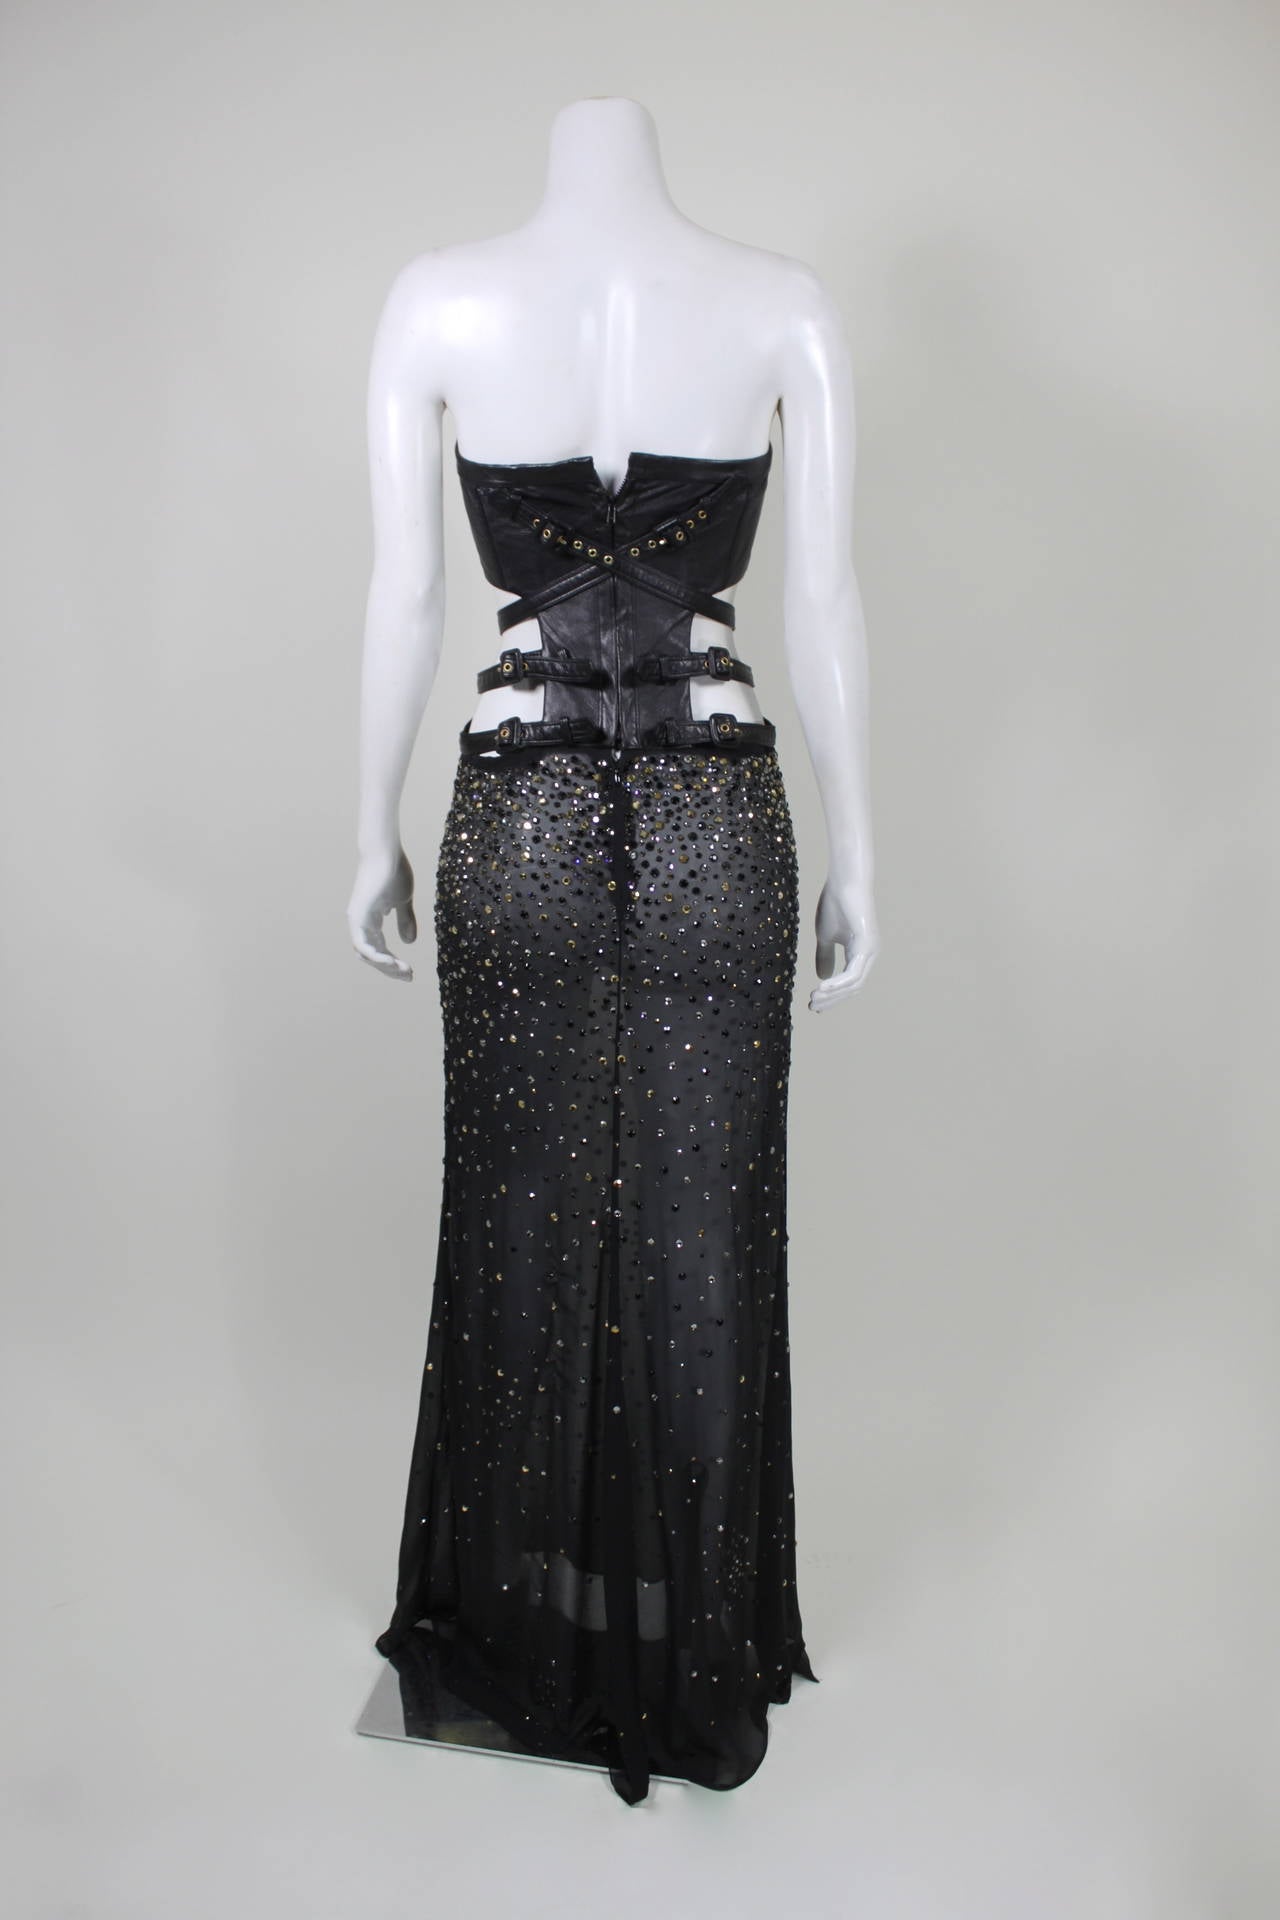 Women's Gianni Versace Black Leather, Rhinestone and Chiffon Evening Gown For Sale